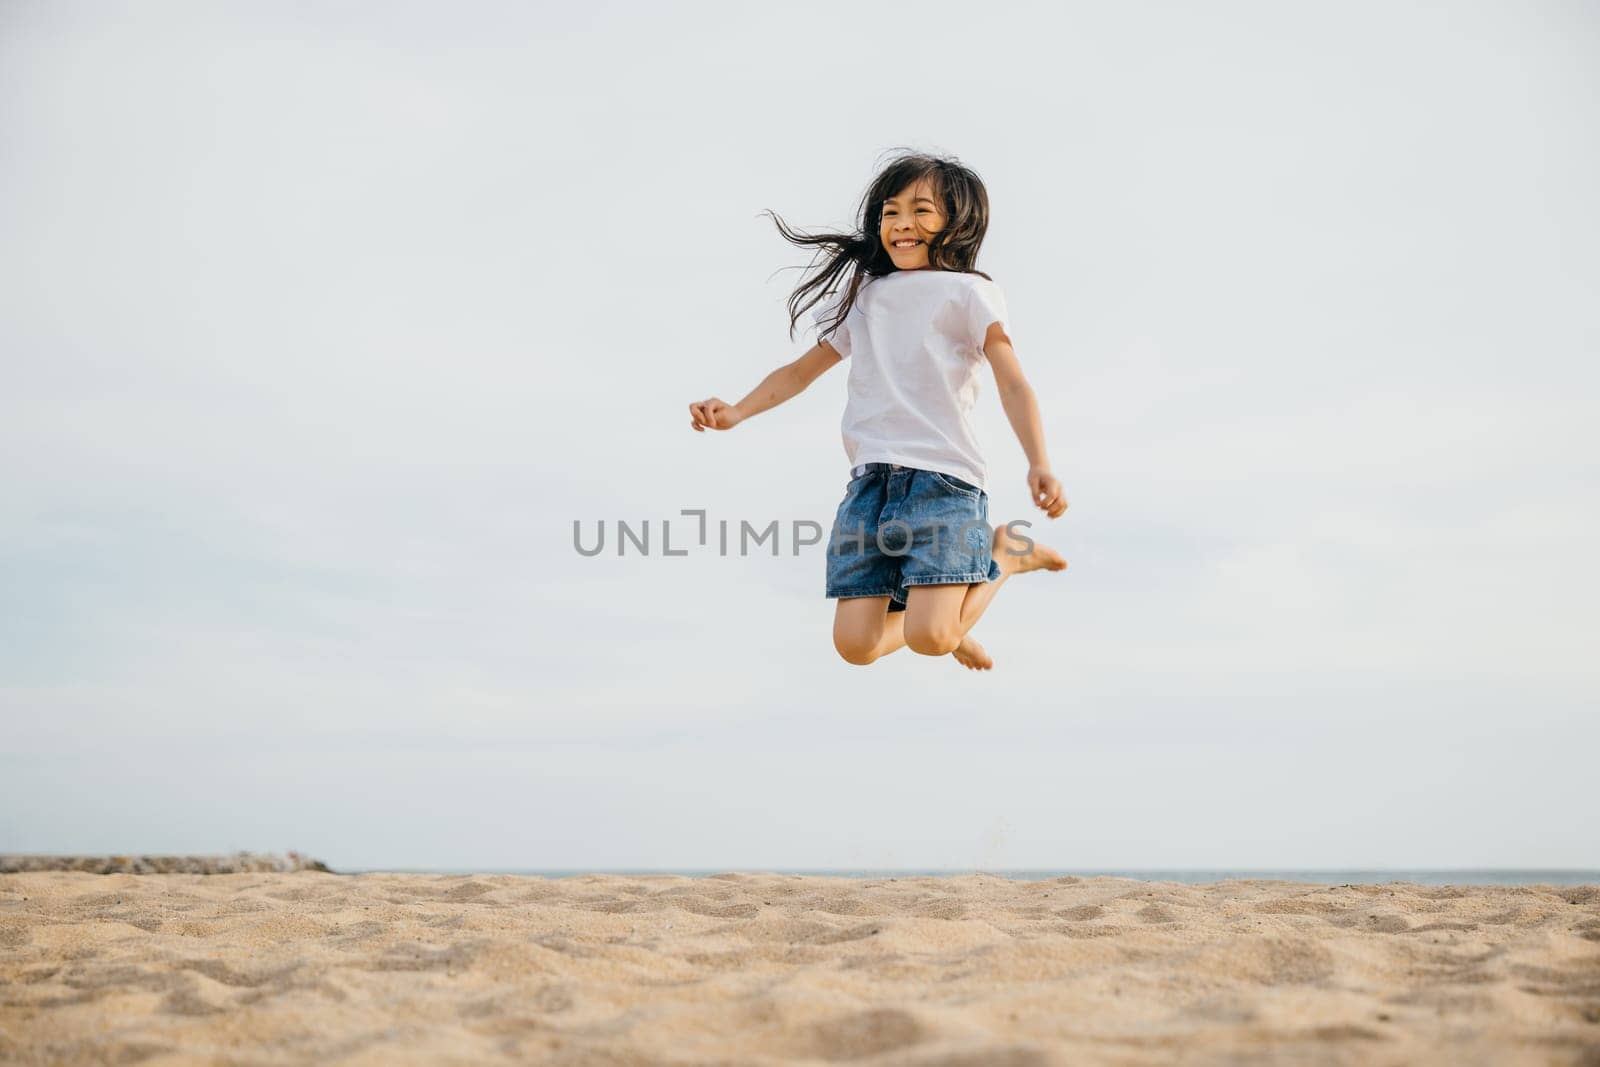 Capturing the essence of childhood a little girl jumps on the beach in the Caribbean sun. Playful motion vitality and a portrait of joy and happiness